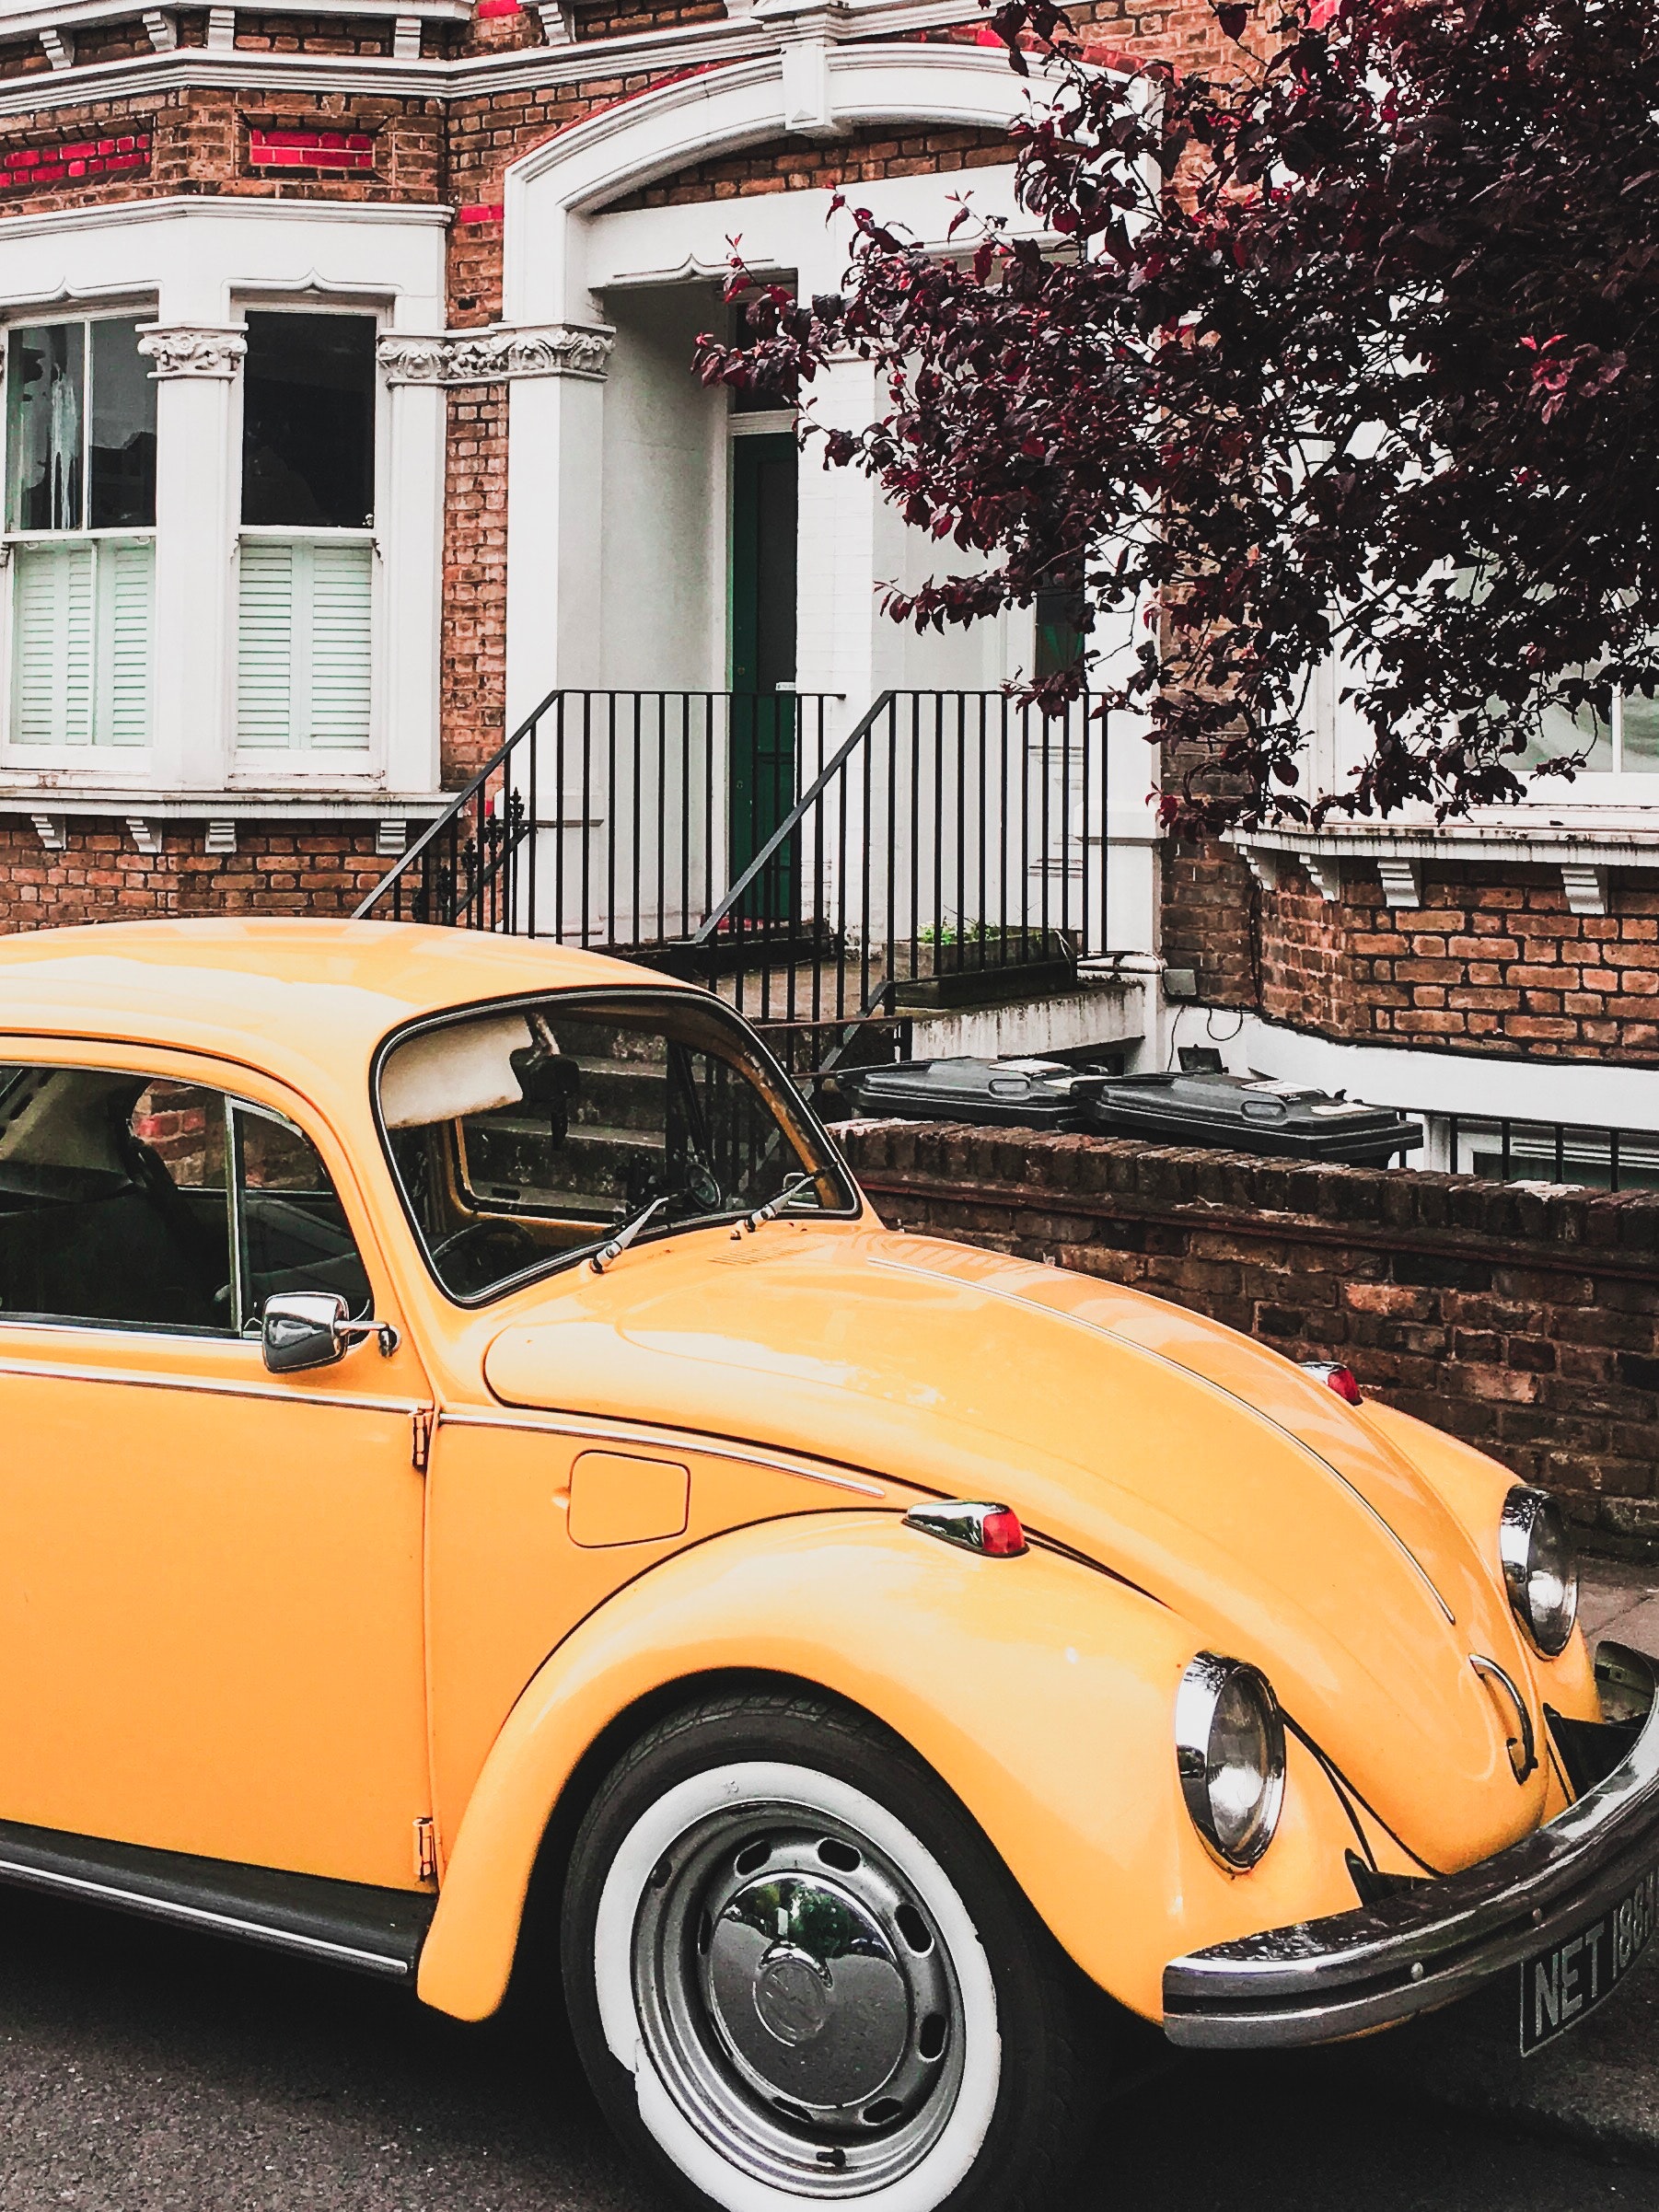 Yellow VW Beetle Parked by the Curb Next to a House